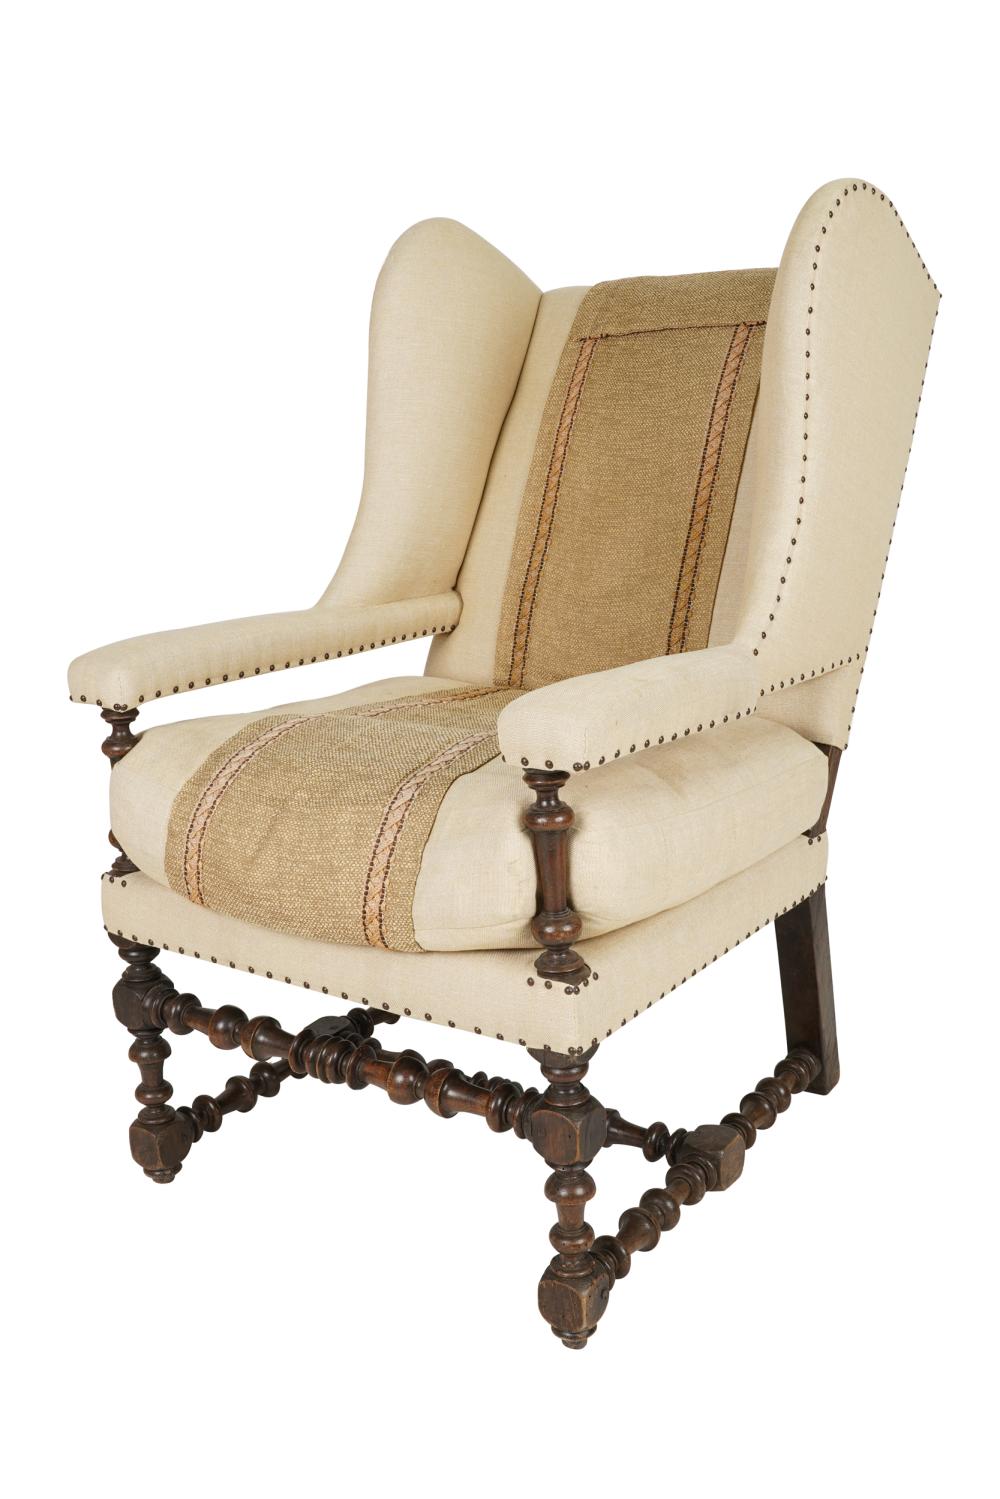 JACOBEAN STYLE WALNUT WING CHAIRwith 332fd8